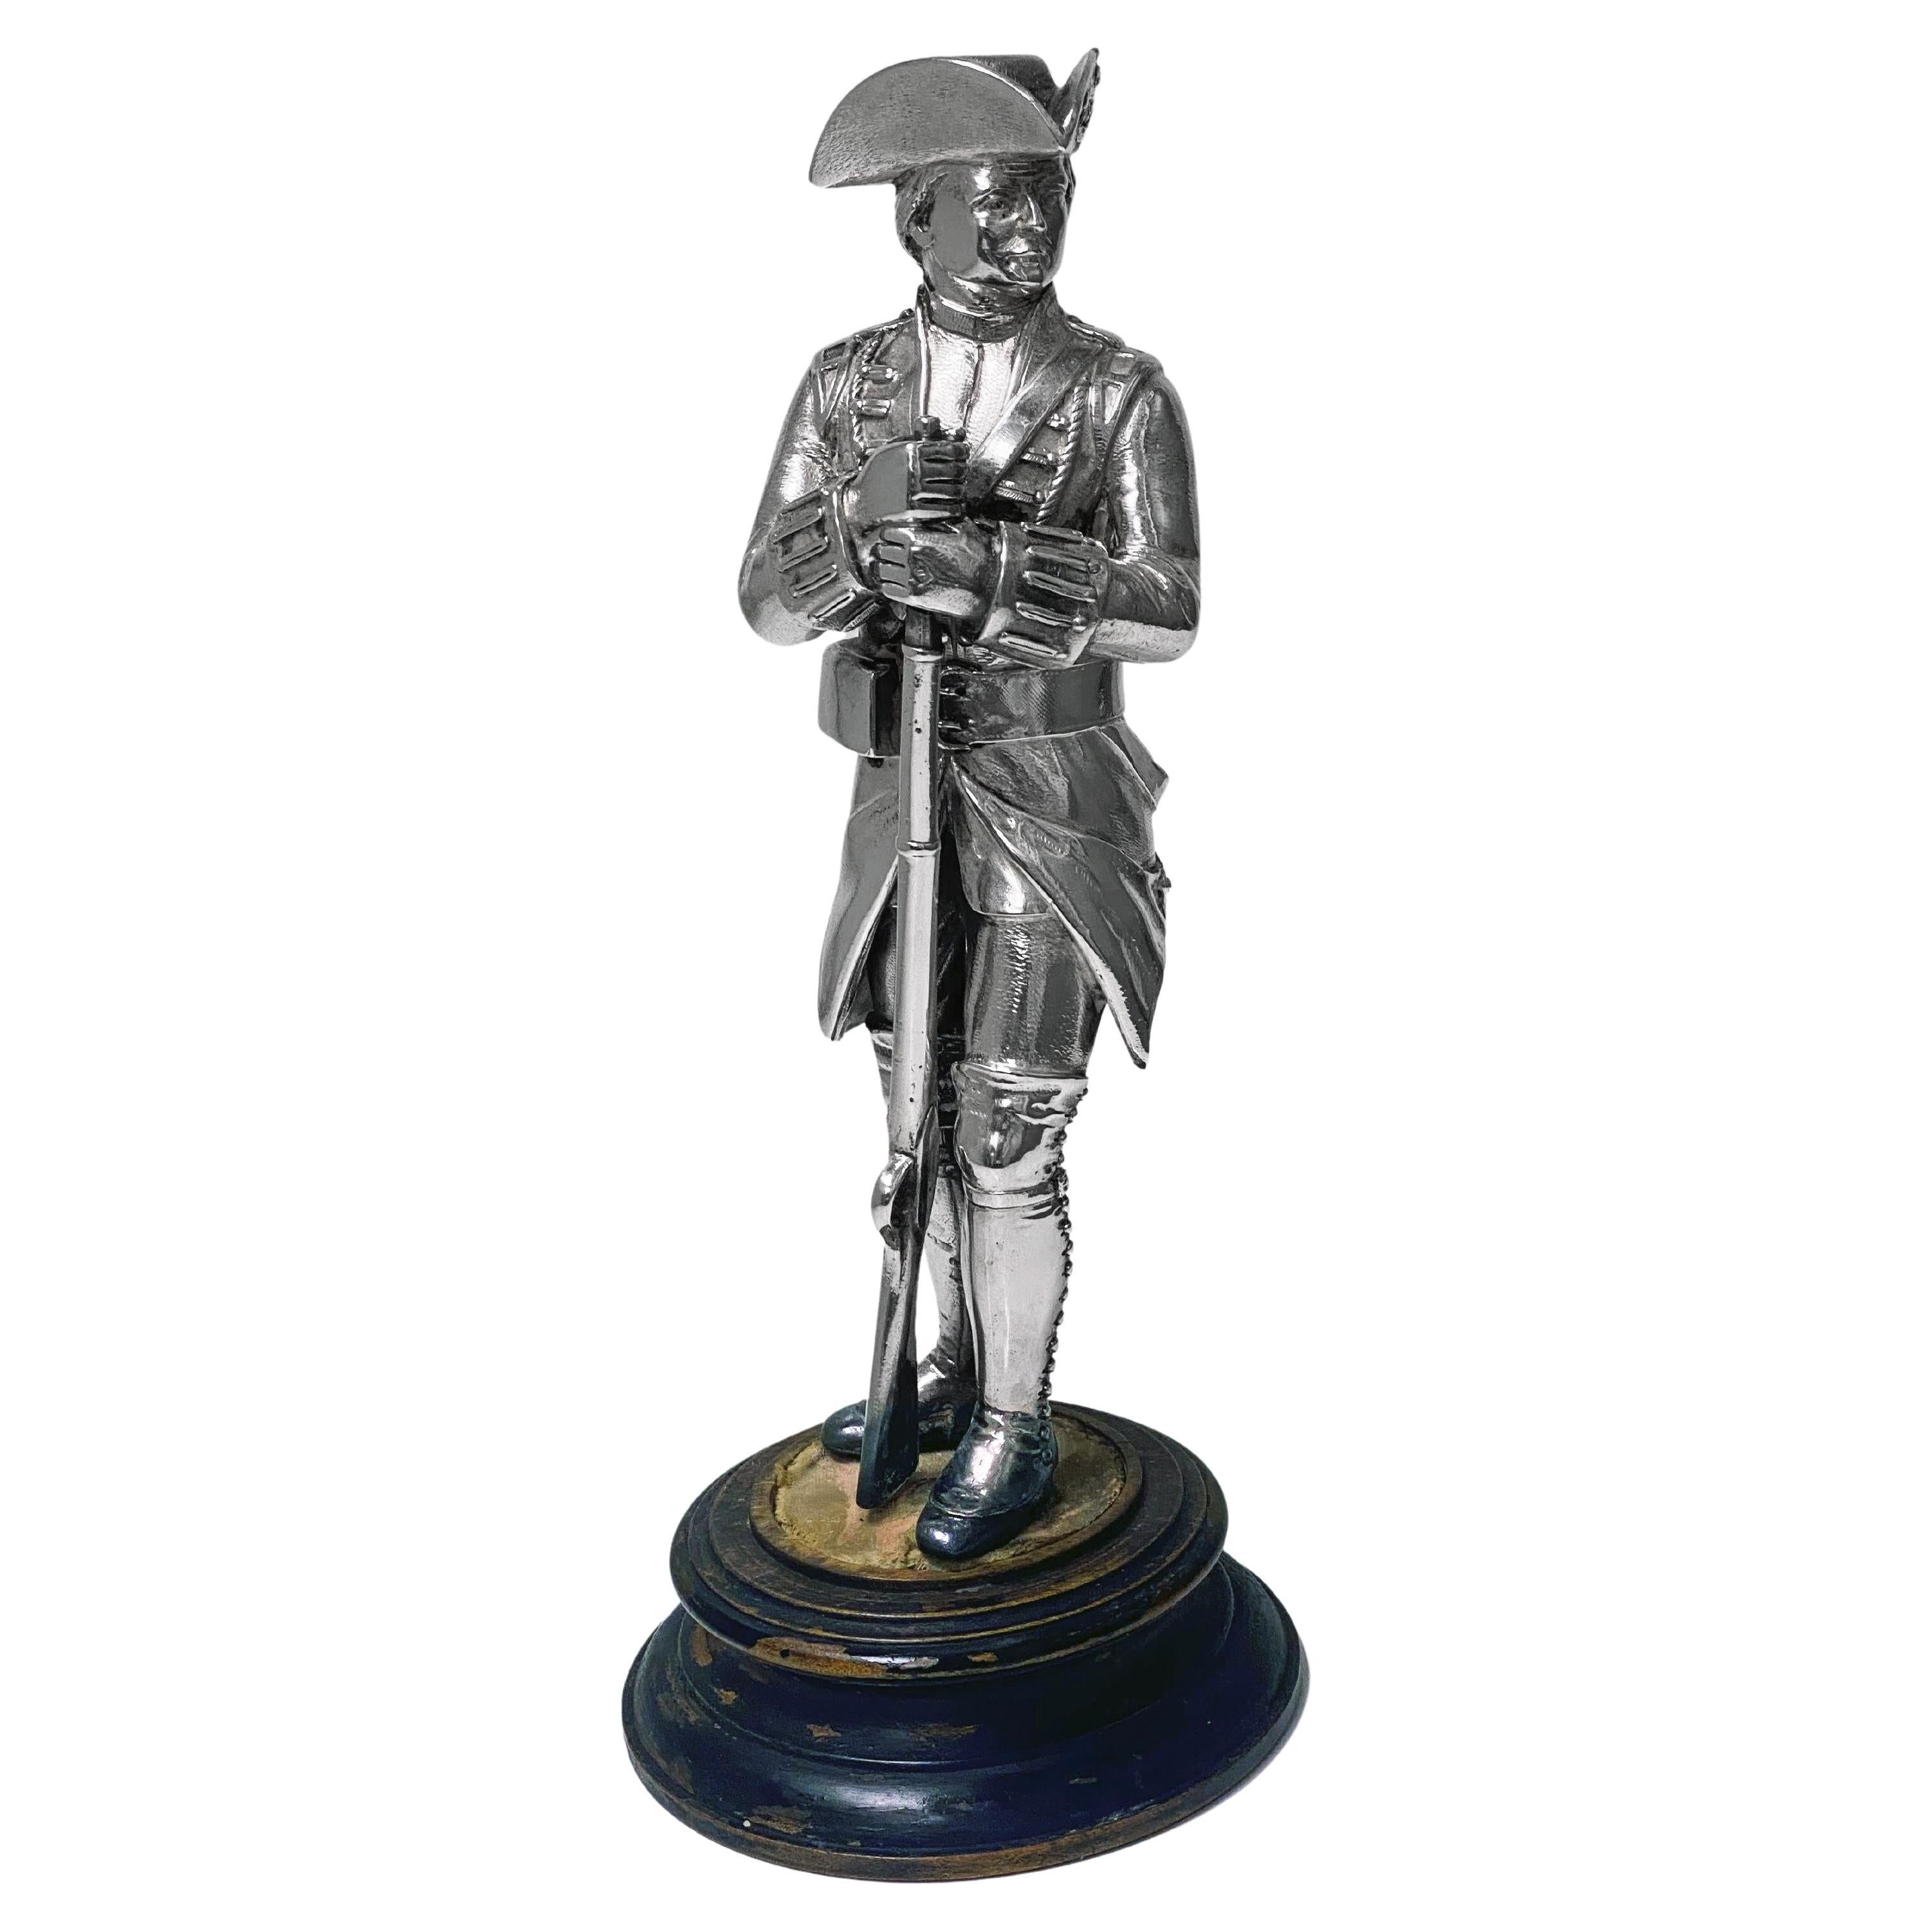 Antique Sterling Silver military figure London 1882 George Angell